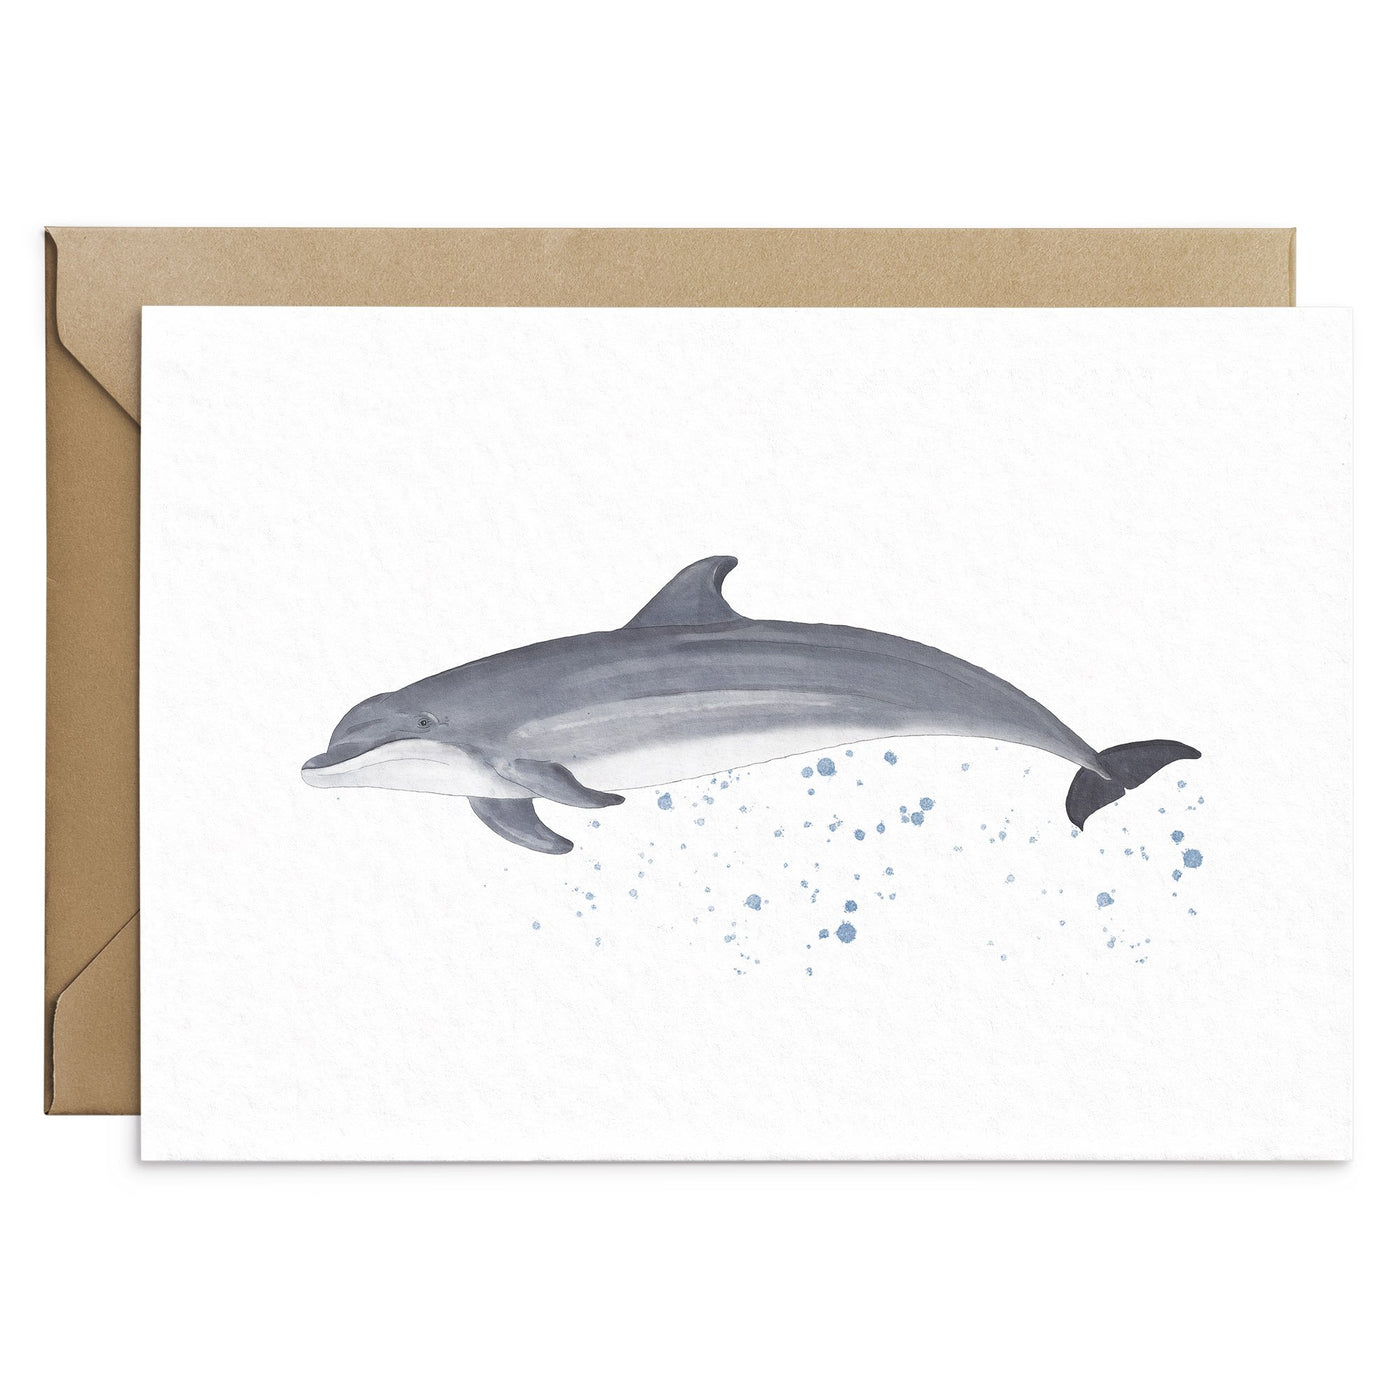 Dolphin Greeting Card - Poppins & Co.